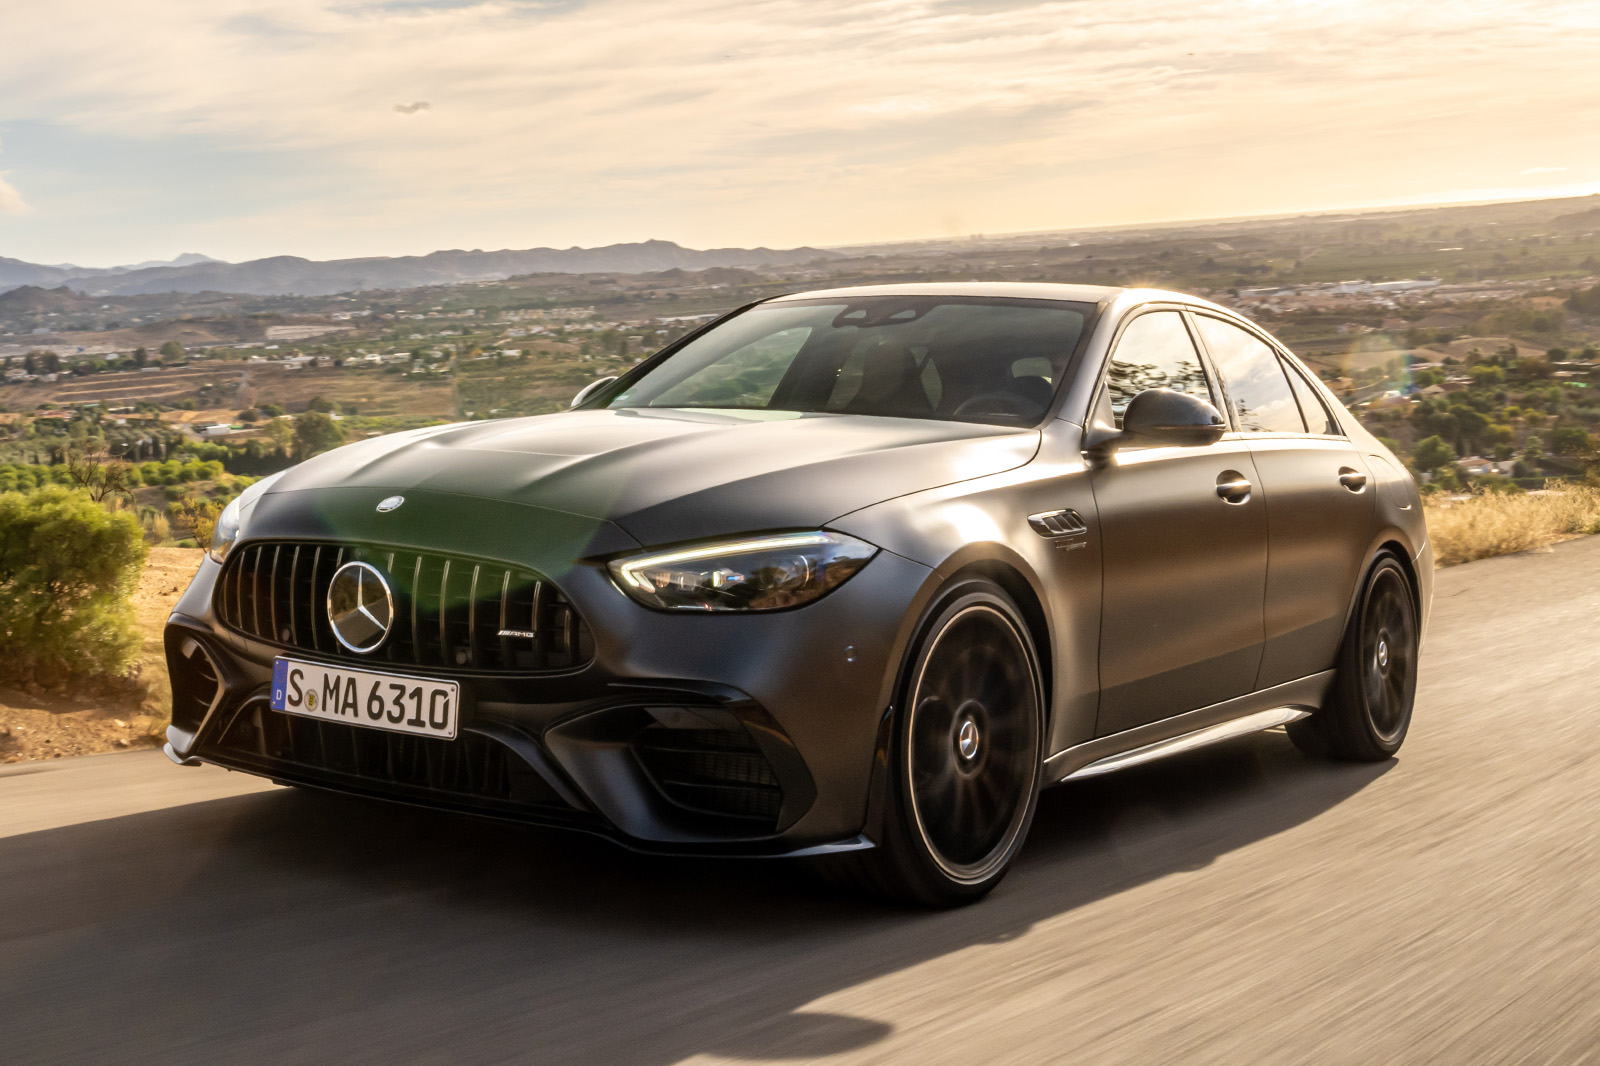 Mercedes-AMG C 63 S E Performance Adds Limited F1 Edition - The